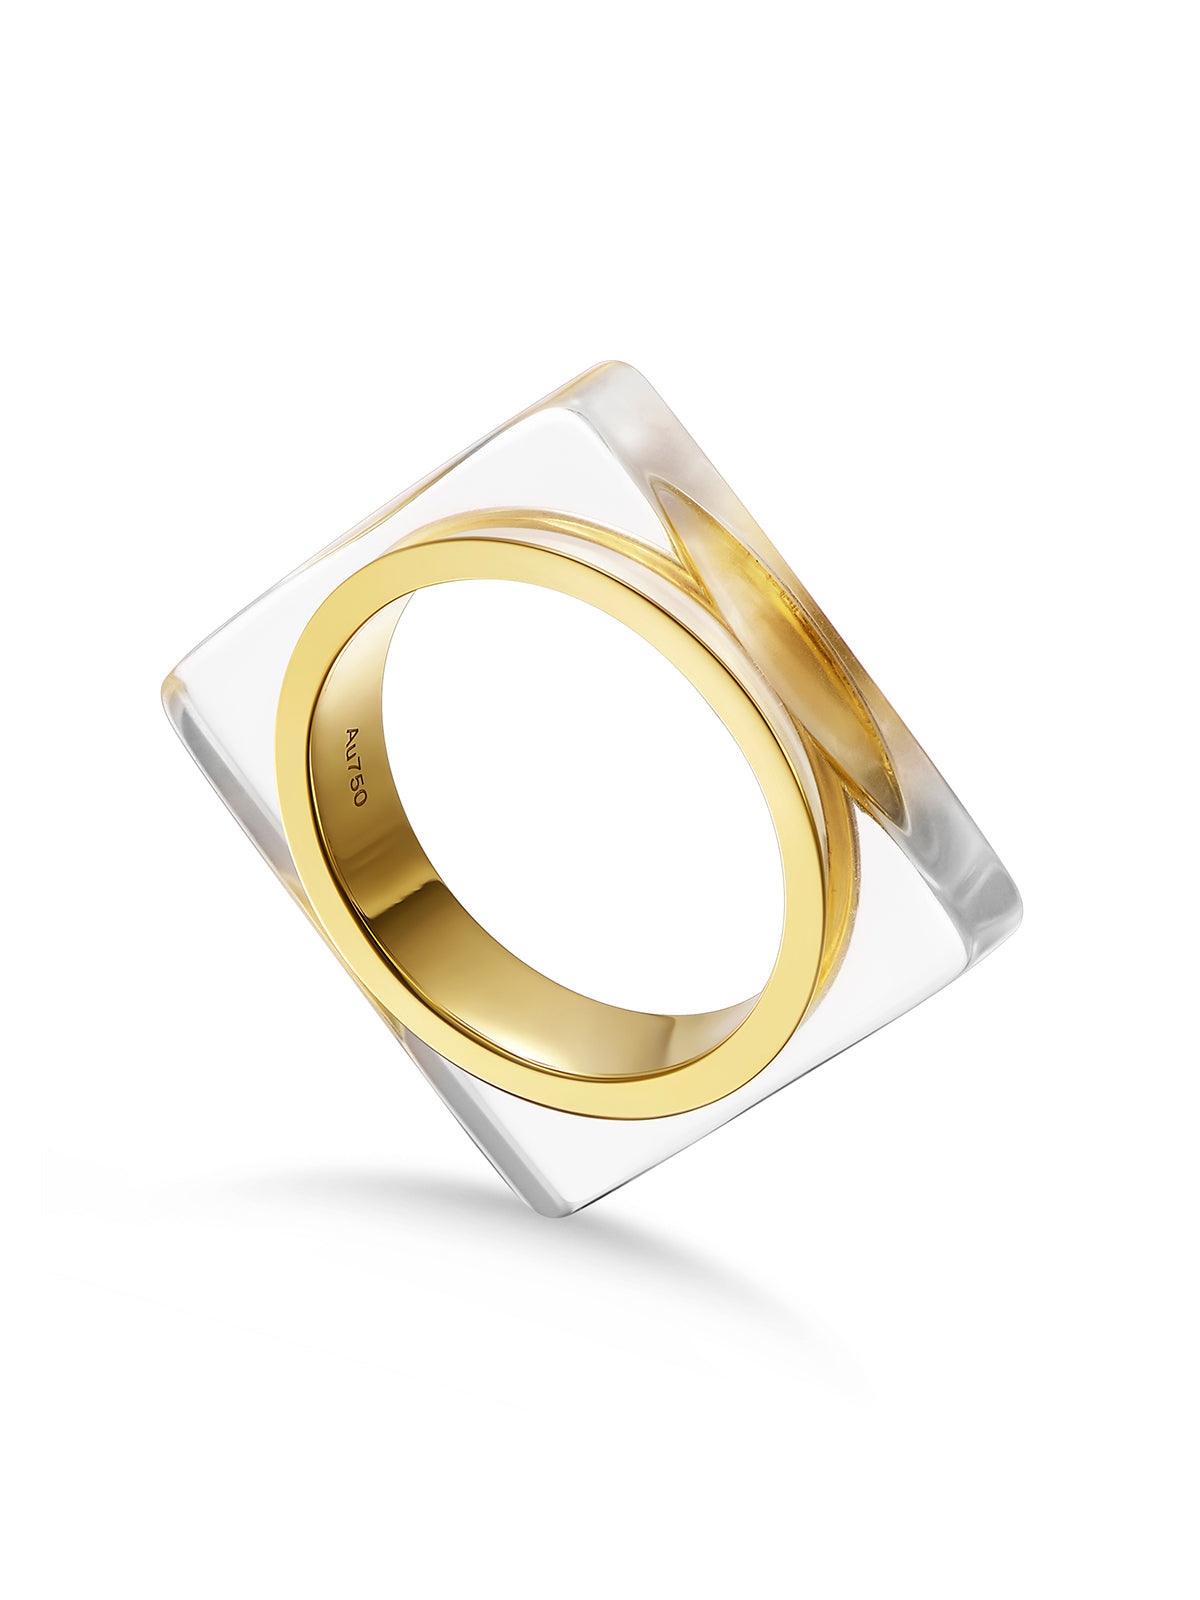 Square & Round II Minimalistic Two Tier Ring